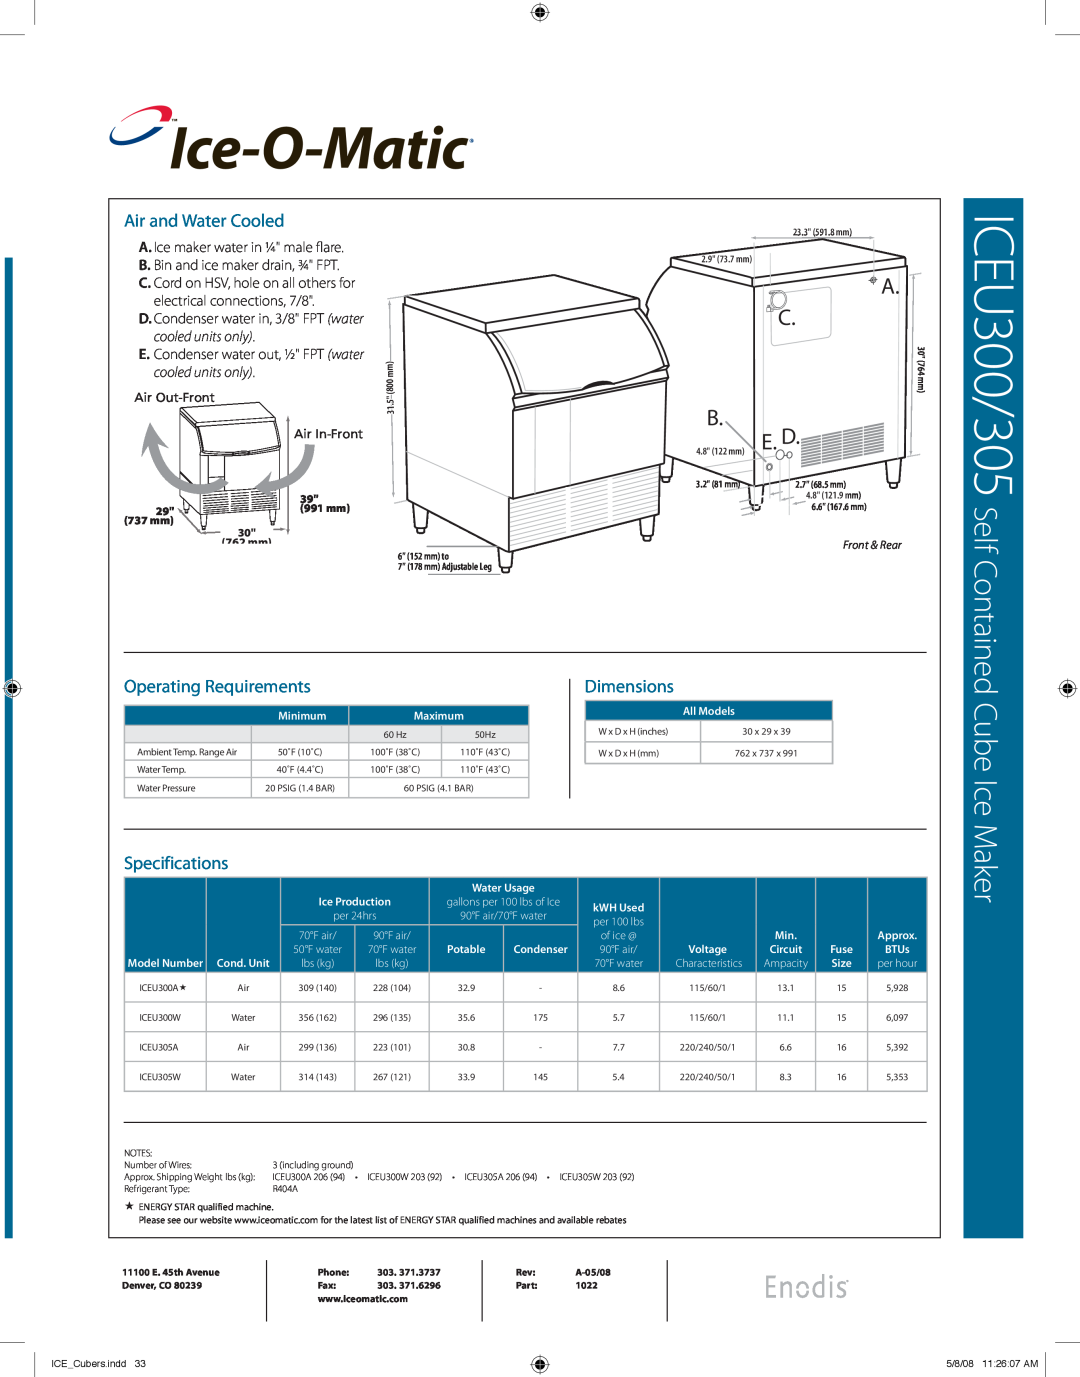 Ice-O-Matic ICEU300 Contained Cube Ice Maker, Air and Water Cooled, Operating Requirements, Specifications, Ice-O-Matic 